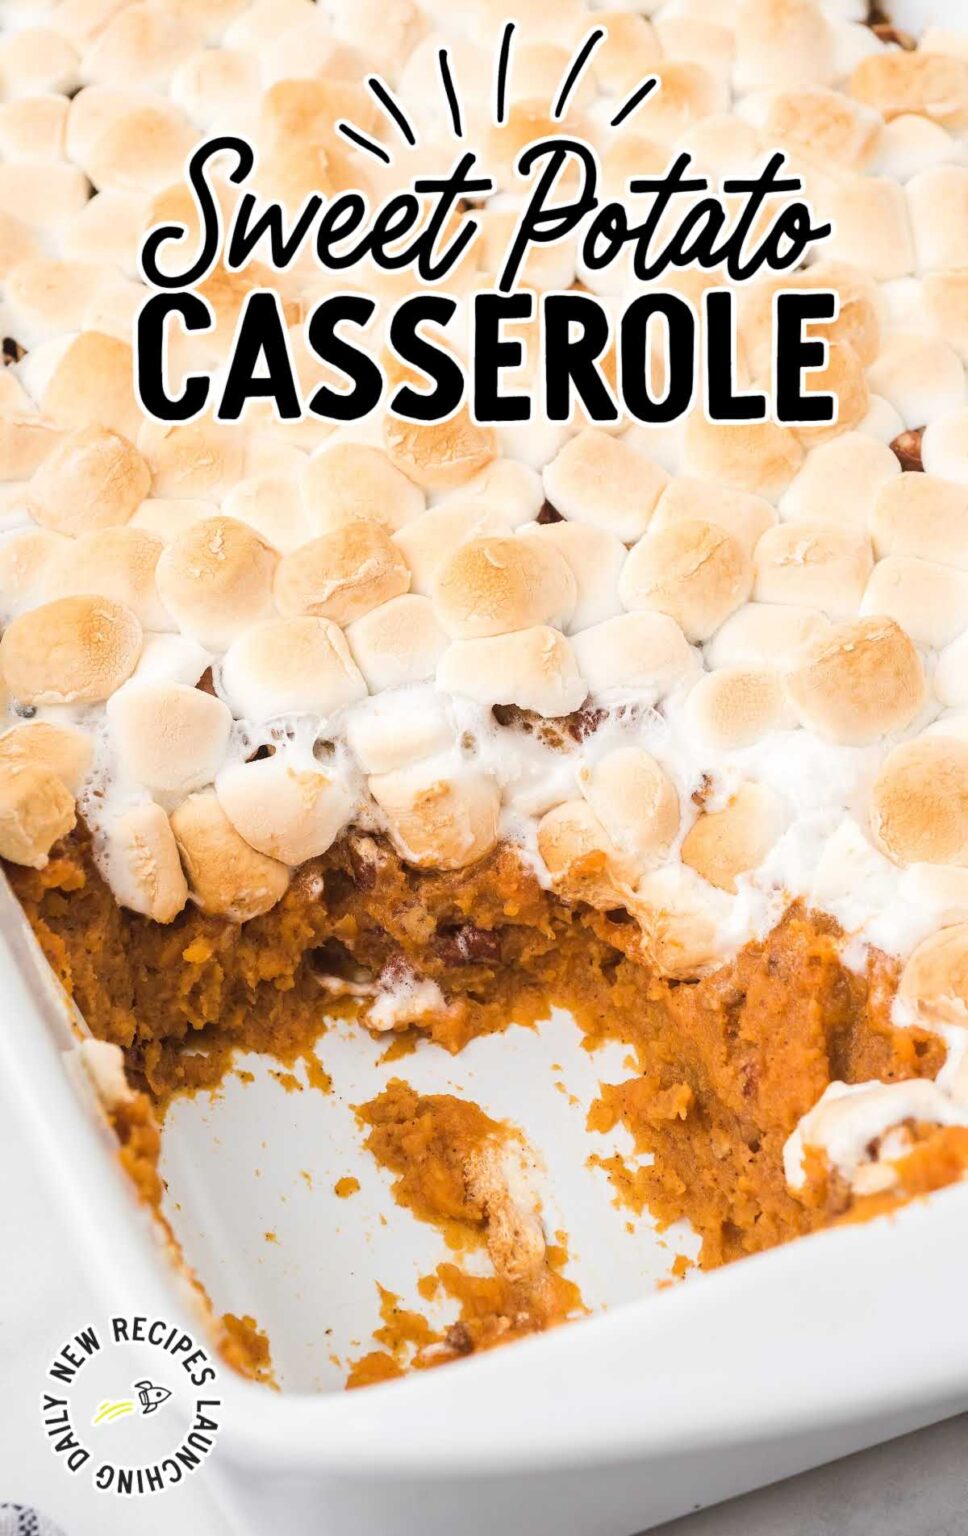 Sweet Potato Casserole - Spaceships and Laser Beams